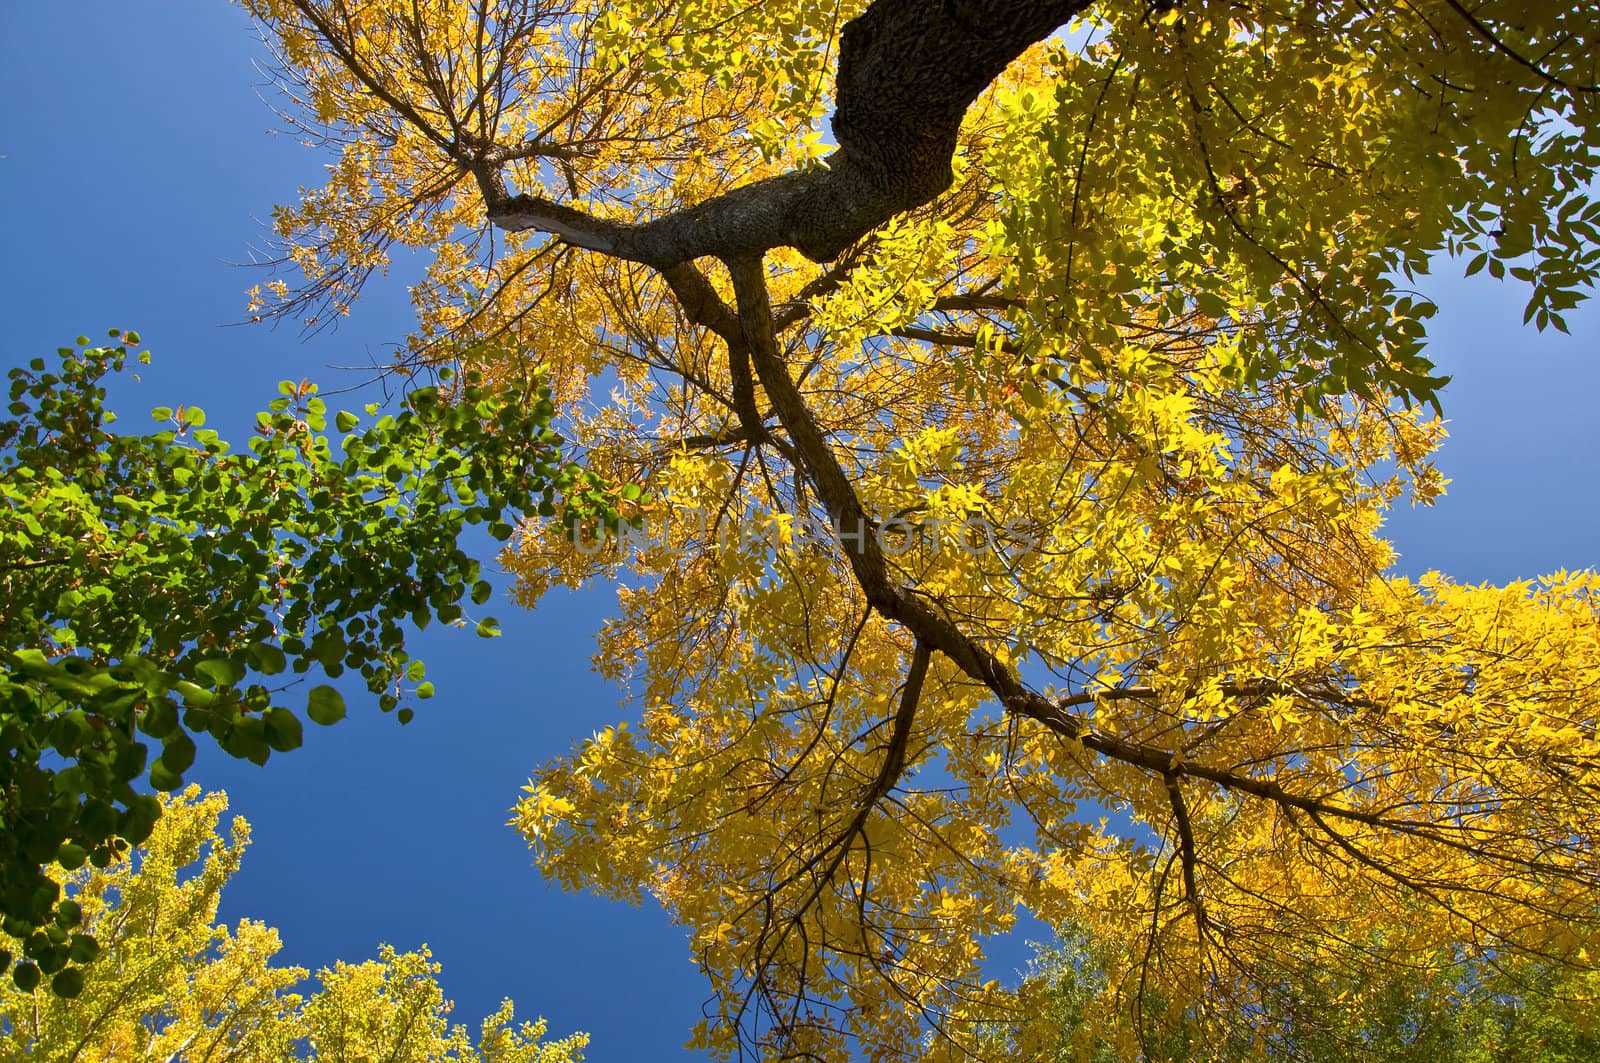 Autumn maple branch with yellow leaves against the blue clear sky.